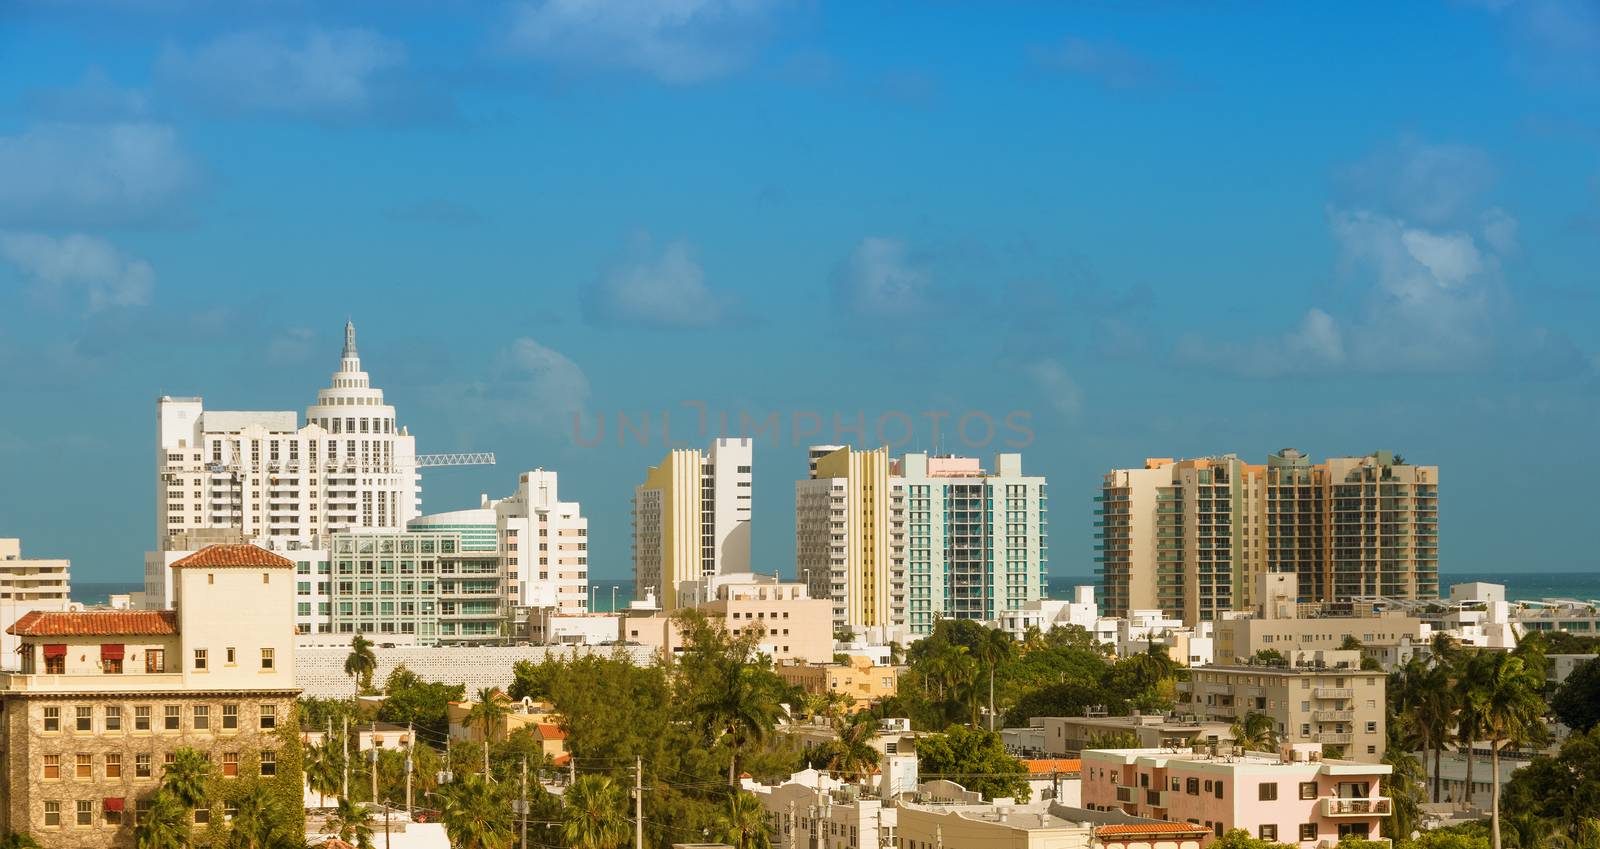 The view on buildings at South Beach, Miami Beach, Florida, USA, from the west part of the city.